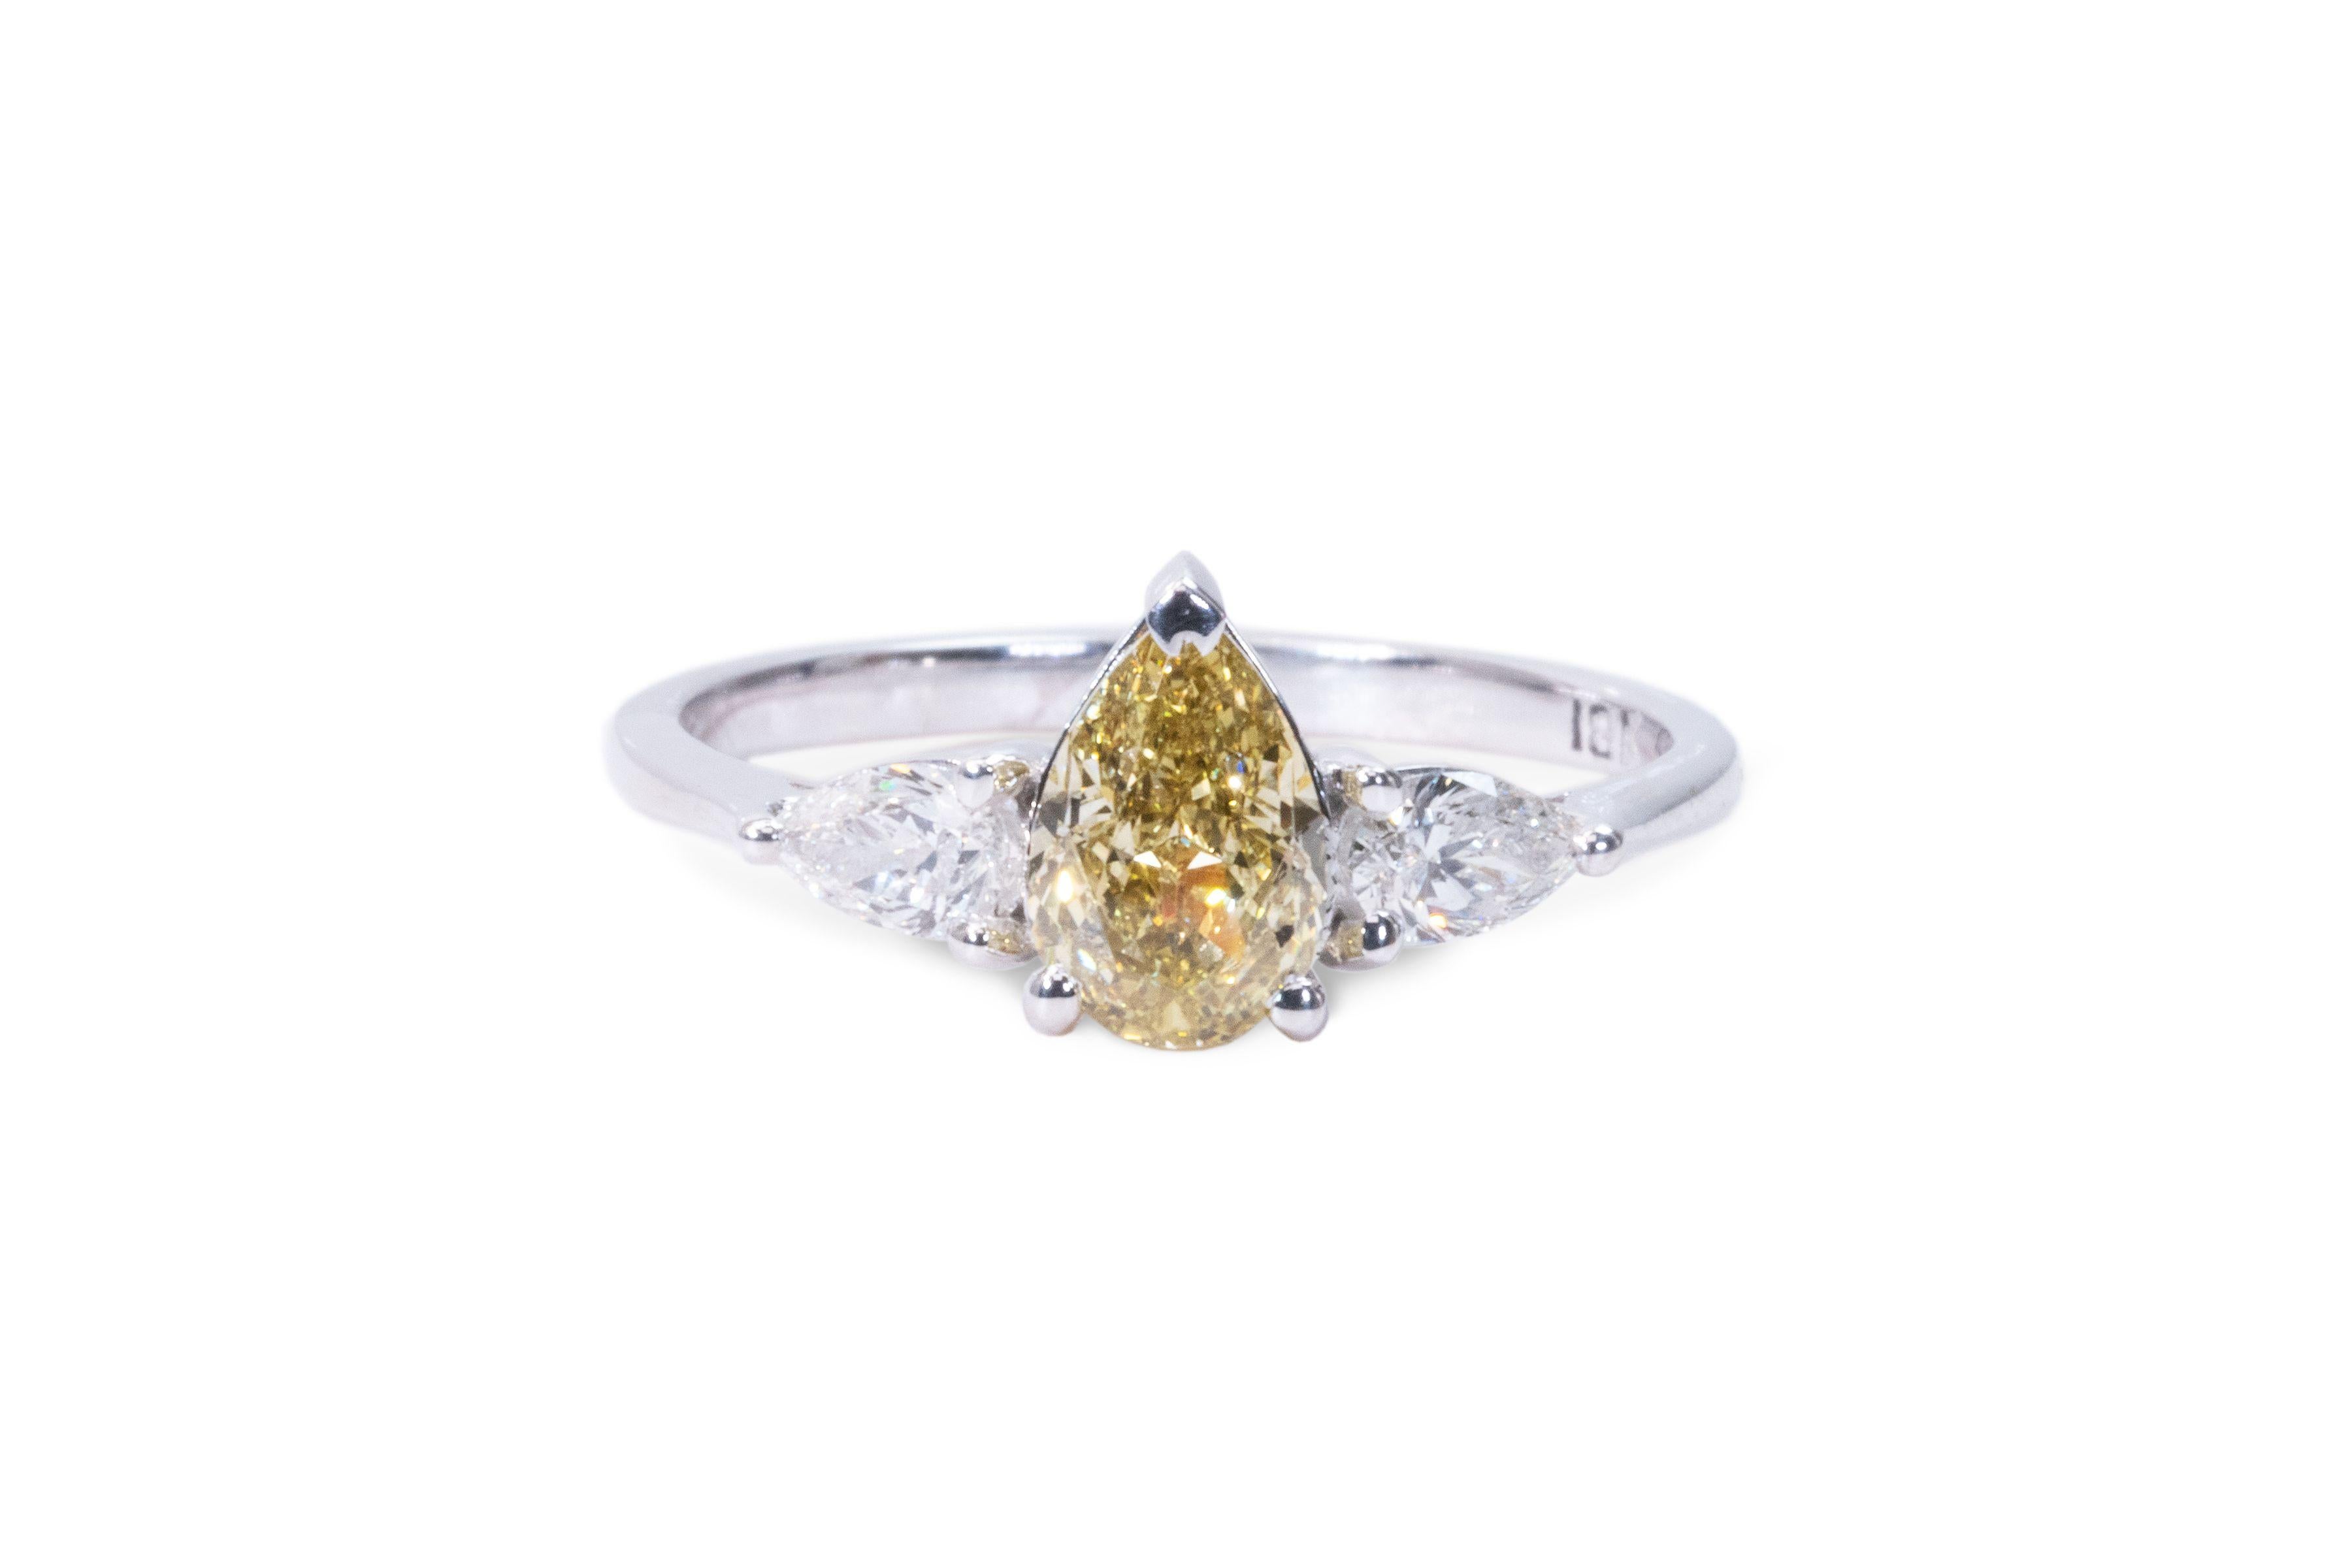 Stunning 3 stone ring made from 18k white gold with 1.22 total diamond carats of pear shape diamonds. This ring comes with a GIA certificate and a fancy box.

-1 diamond main stone of 0.91 ct.
cut: pear
color: natural fancy brownish yellow
clarity: